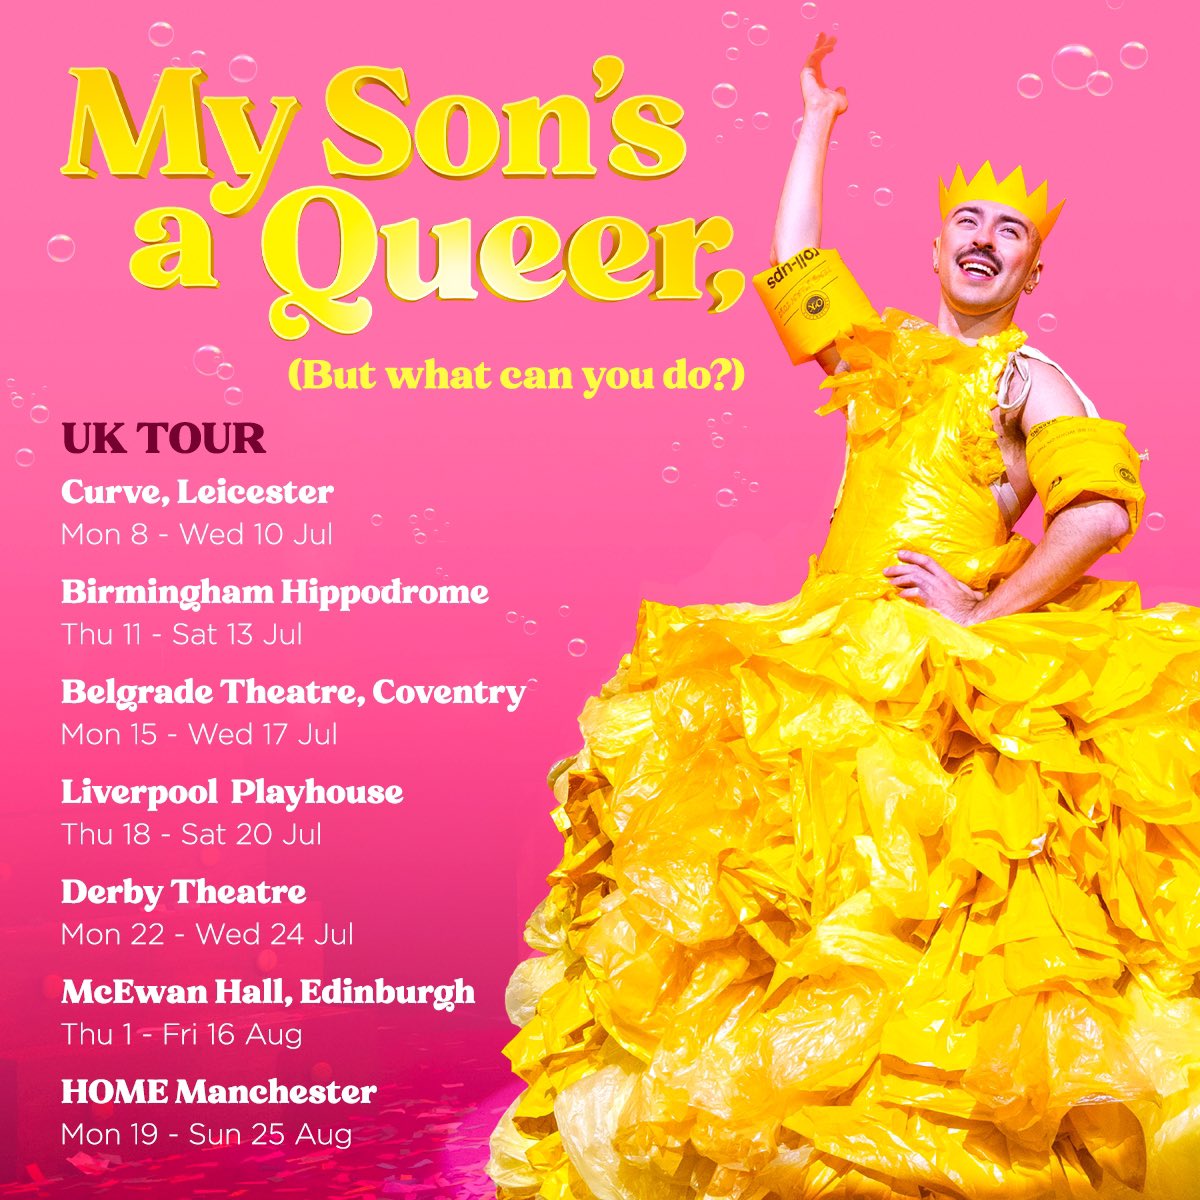 I am so very excited to announce that My Son’s a Queer is going on a UK tour this summer.